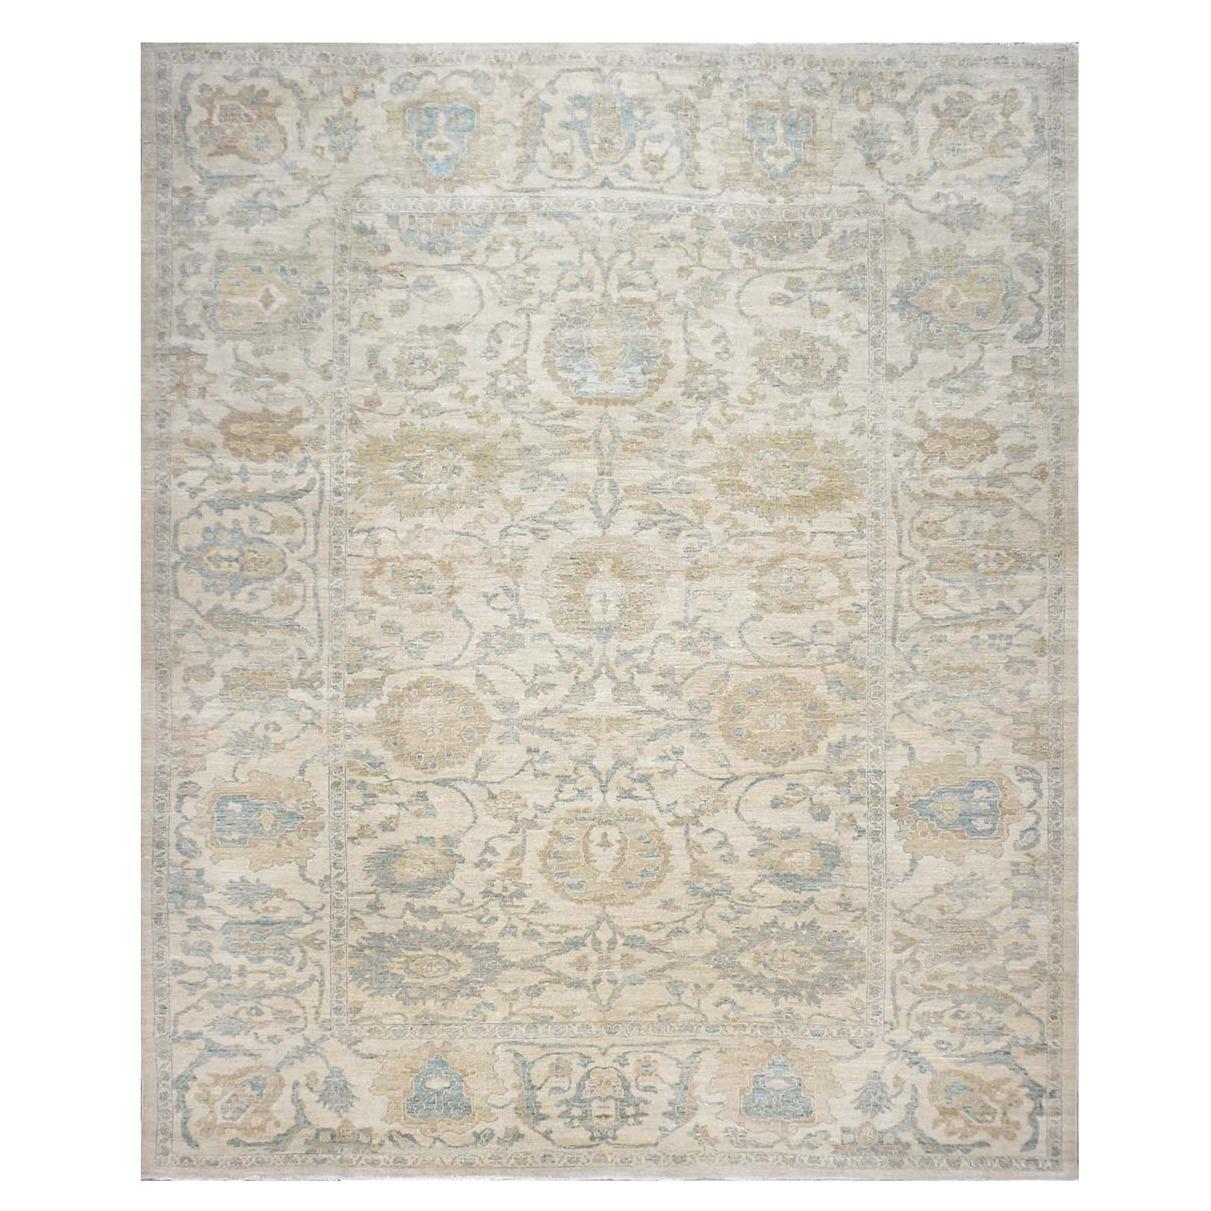 21st Century Persian Sultanabad Master 12x15 Ivory & Tan Handmade Area Rug For Sale